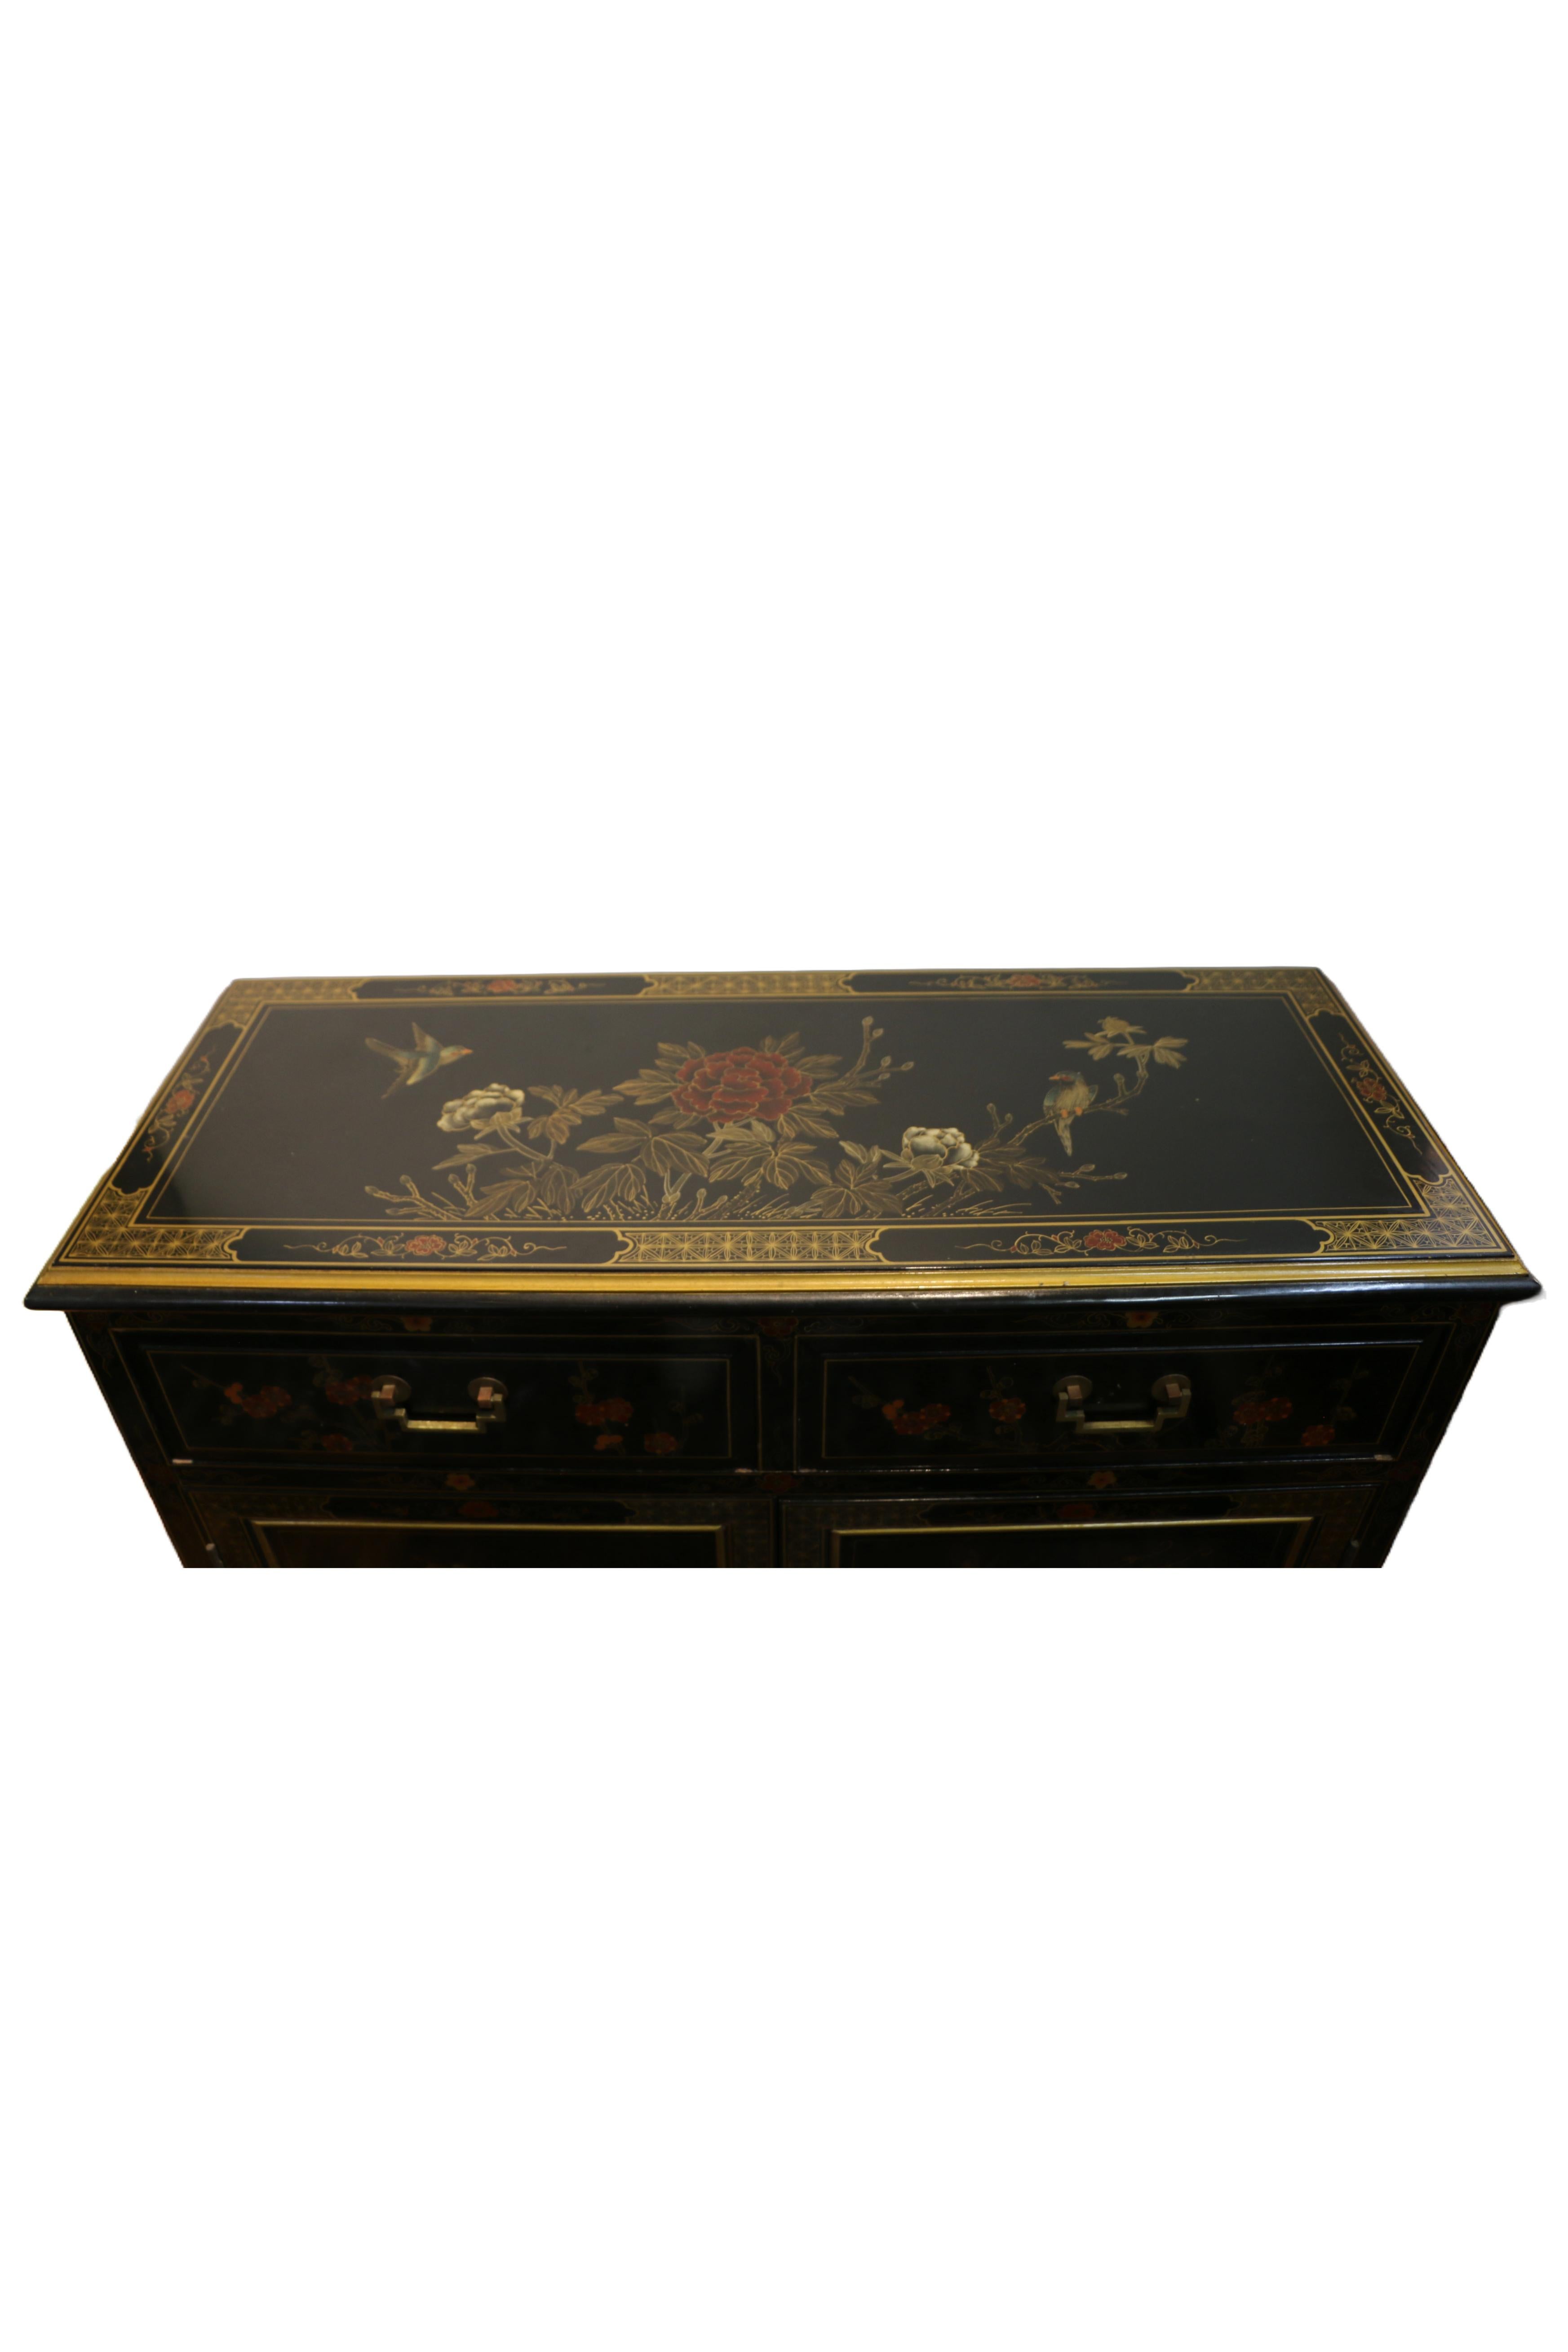 A mid century hand painted black wood chinese chinoiserie credenza with decorations. Made in the 1970s. Credenza has 2 drawers with brass handles and a cabinet on the bottom. Credenza has a glass top and one glass shelf in the cabinet underneath.